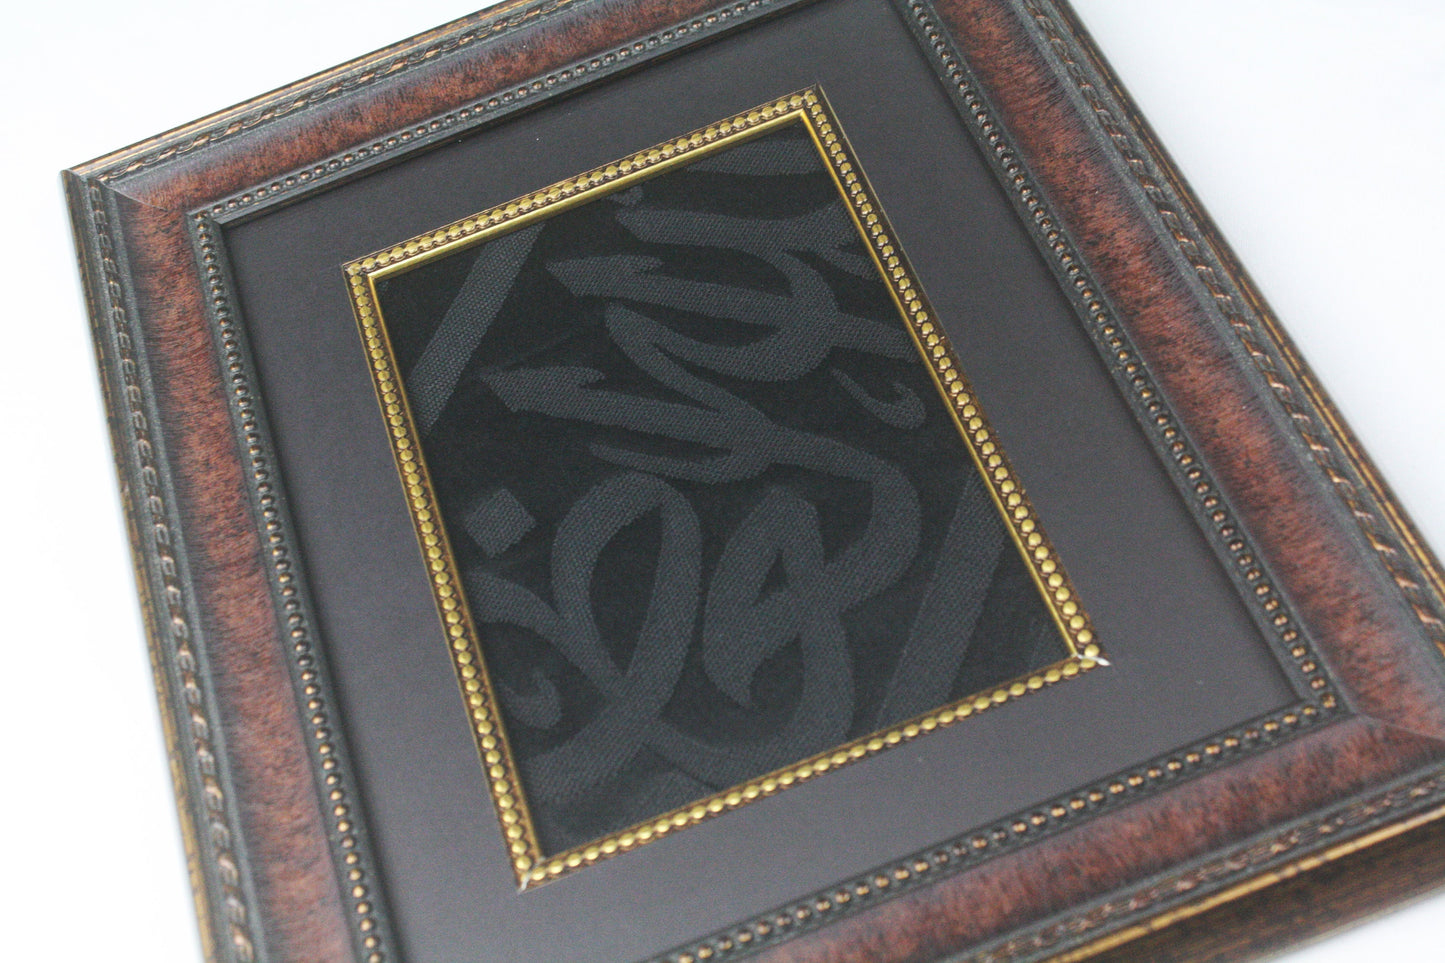 Framed Islamic Relic Ka'ba Cloth - Muslim Eid Al Fitr Holiday Gift - Gift For Muslim Family Home Decor, Unique Gift For Muslim Father